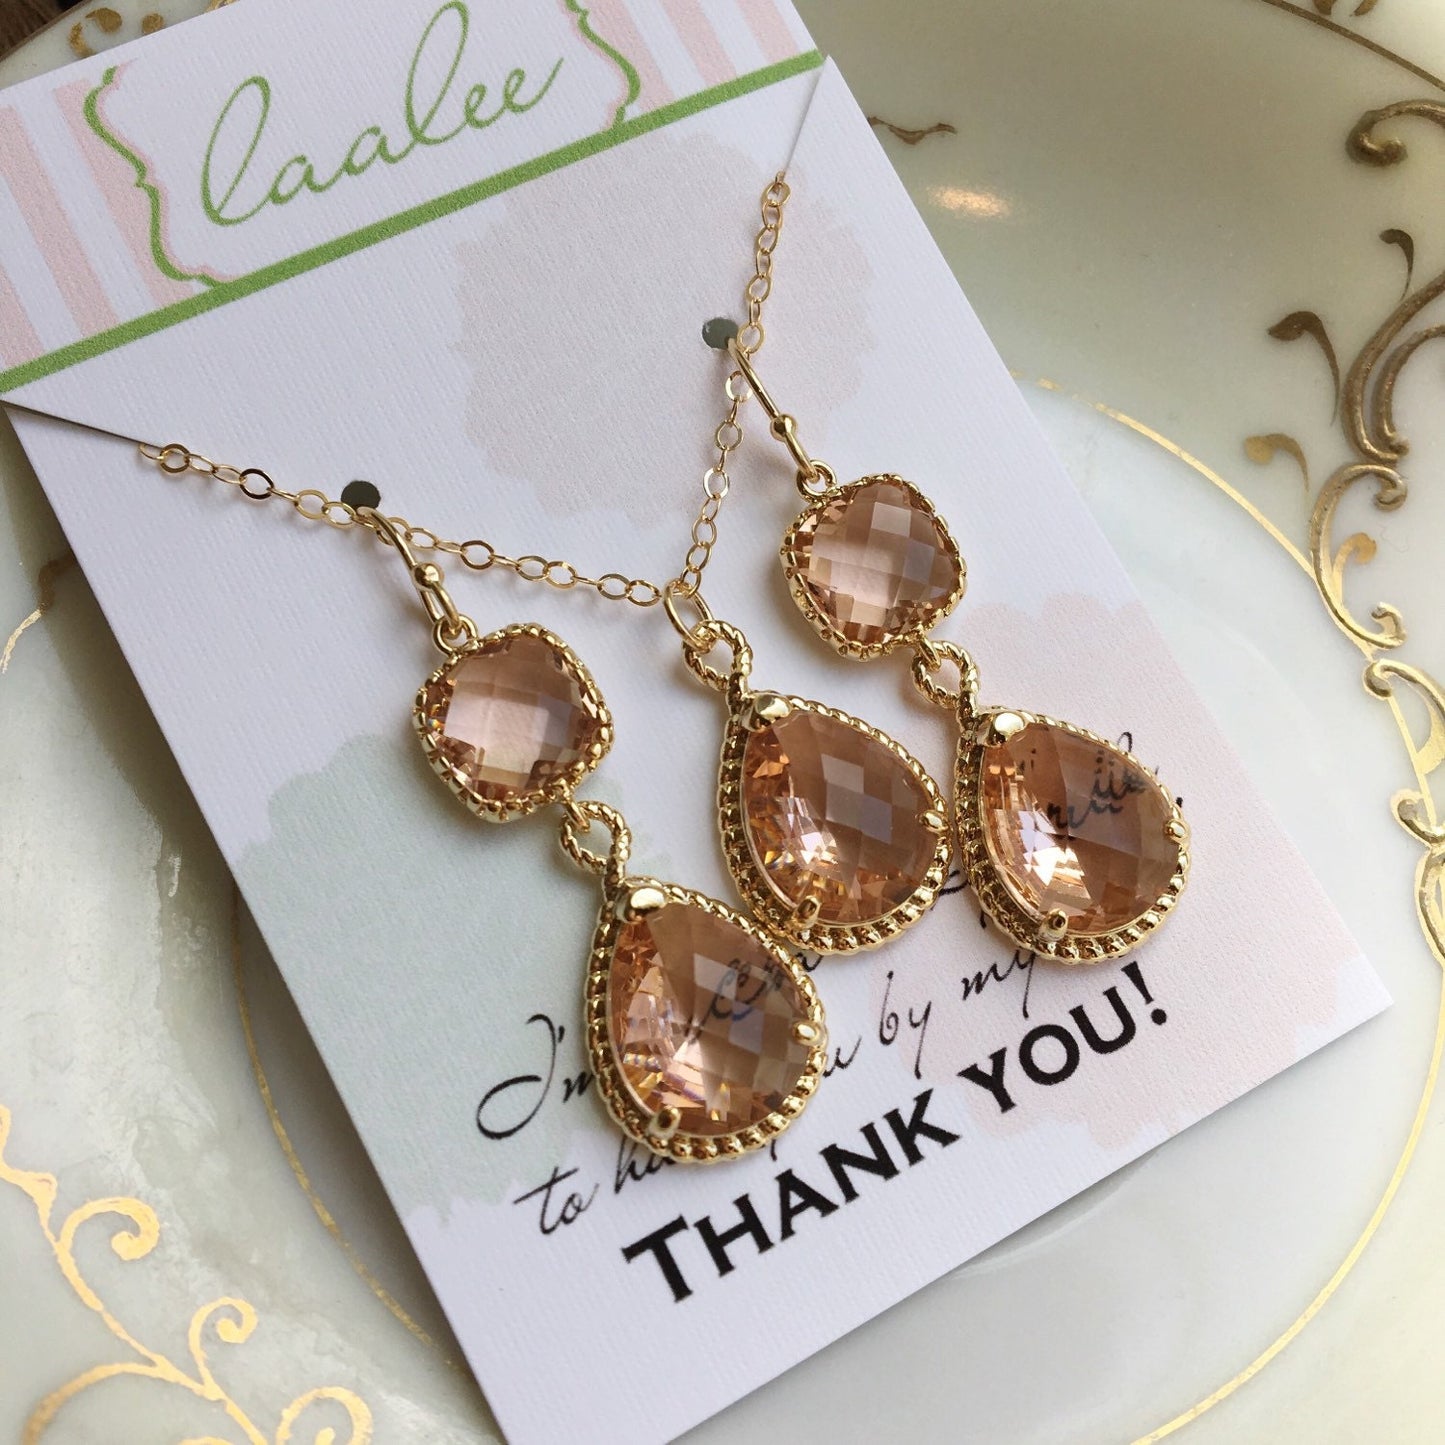 Blush Jewelry Set, Gold Blush Earrings, Blush Bridal Set, Champagne Earrings, Blush Bridesmaid Jewelry, Thank you for being my Bridesmaid